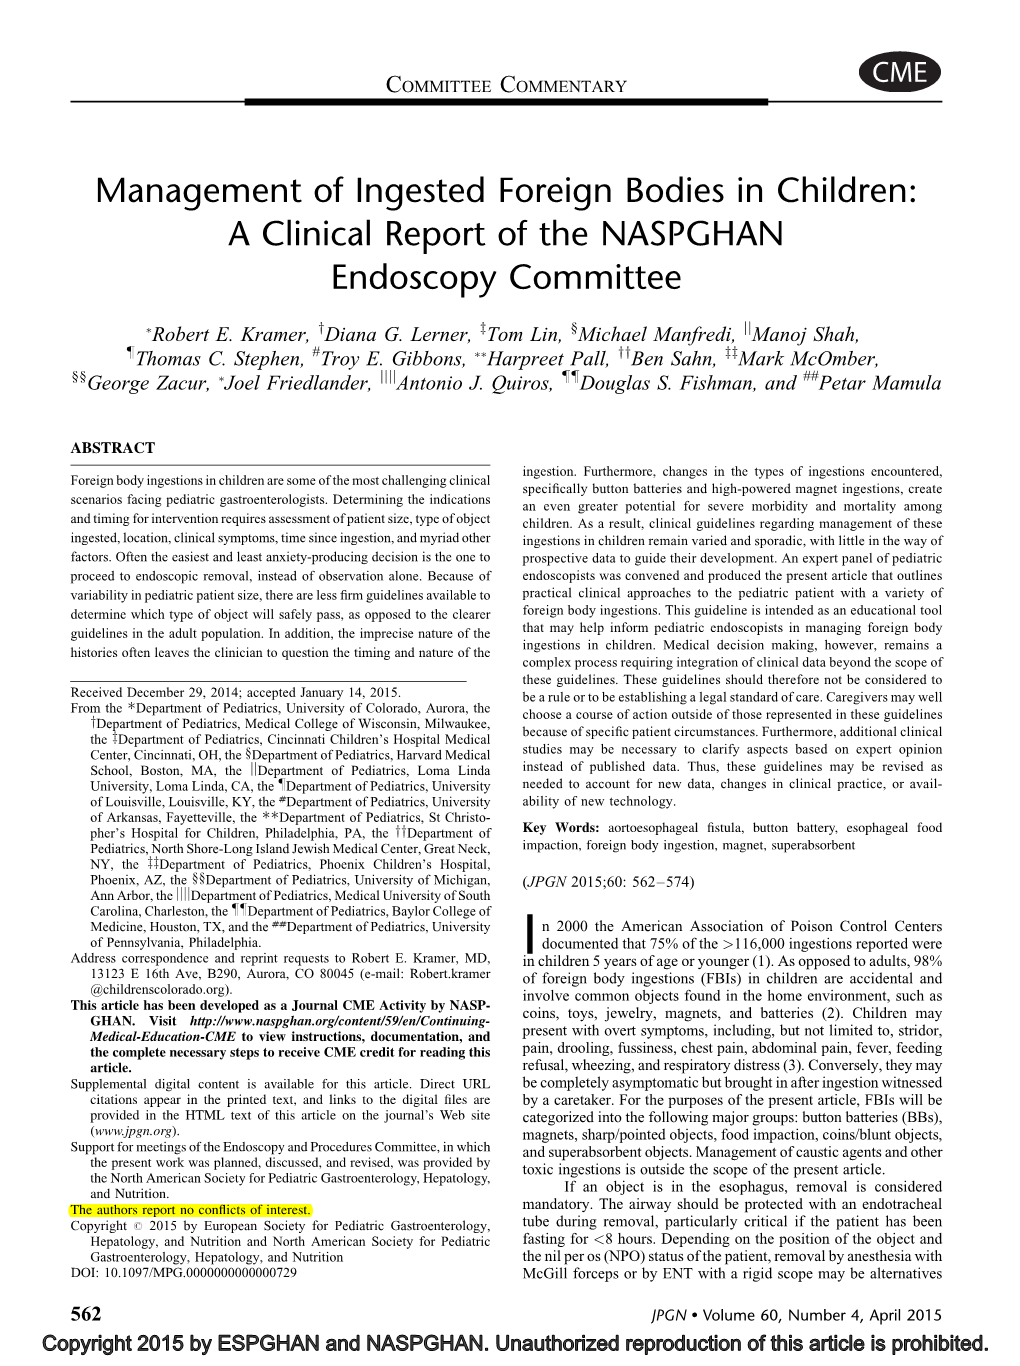 Management of Ingested Foreign Bodies in Children: a Clinical Report of the NASPGHAN Endoscopy Committee